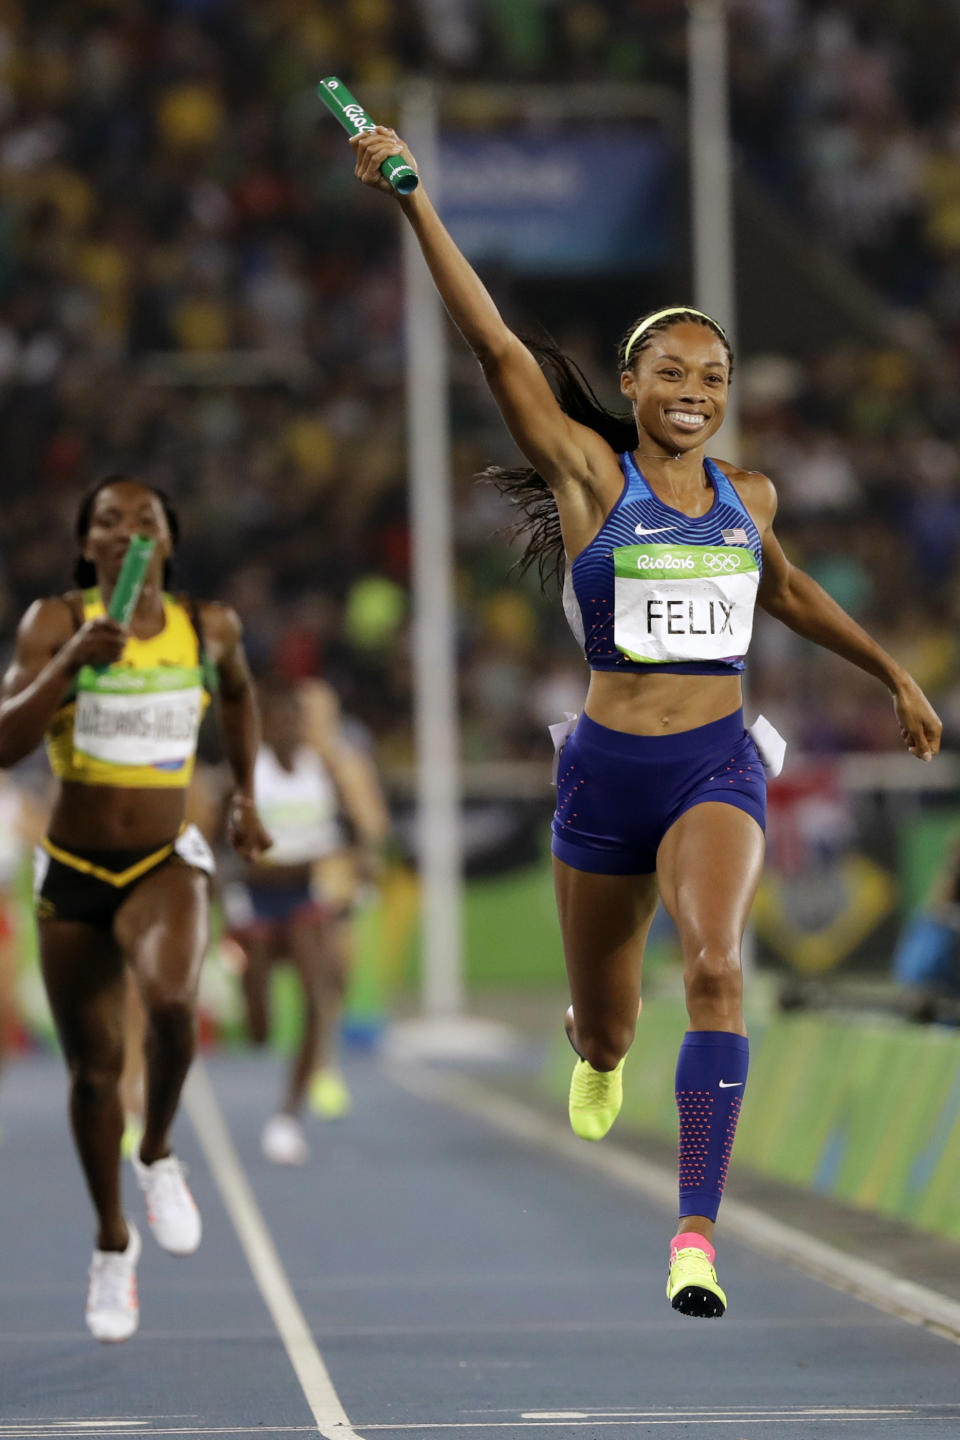 FILE - In this Aug. 20, 2016, file photo, United States' Allyson Felix crosses the line to win the gold medal in the women's 4x400-meter relay final during the athletics competitions of the 2016 Summer Olympics at the Olympic stadium in Rio de Janeiro, Brazil. Early in her career, Allyson Felix would shy away from speaking on controversial subjects. The nine-time Olympic medalist stayed in her lane. Not anymore. Not since the birth of her daughter, Camryn. Felix wants her legacy to be improving maternity rights for athletes over her times and gold medals. "I feel like I'm right where I'm supposed to be," Felix said. "I feel stronger than ever, just with everything I've been through.” (AP Photo/David J. Phillip, File)